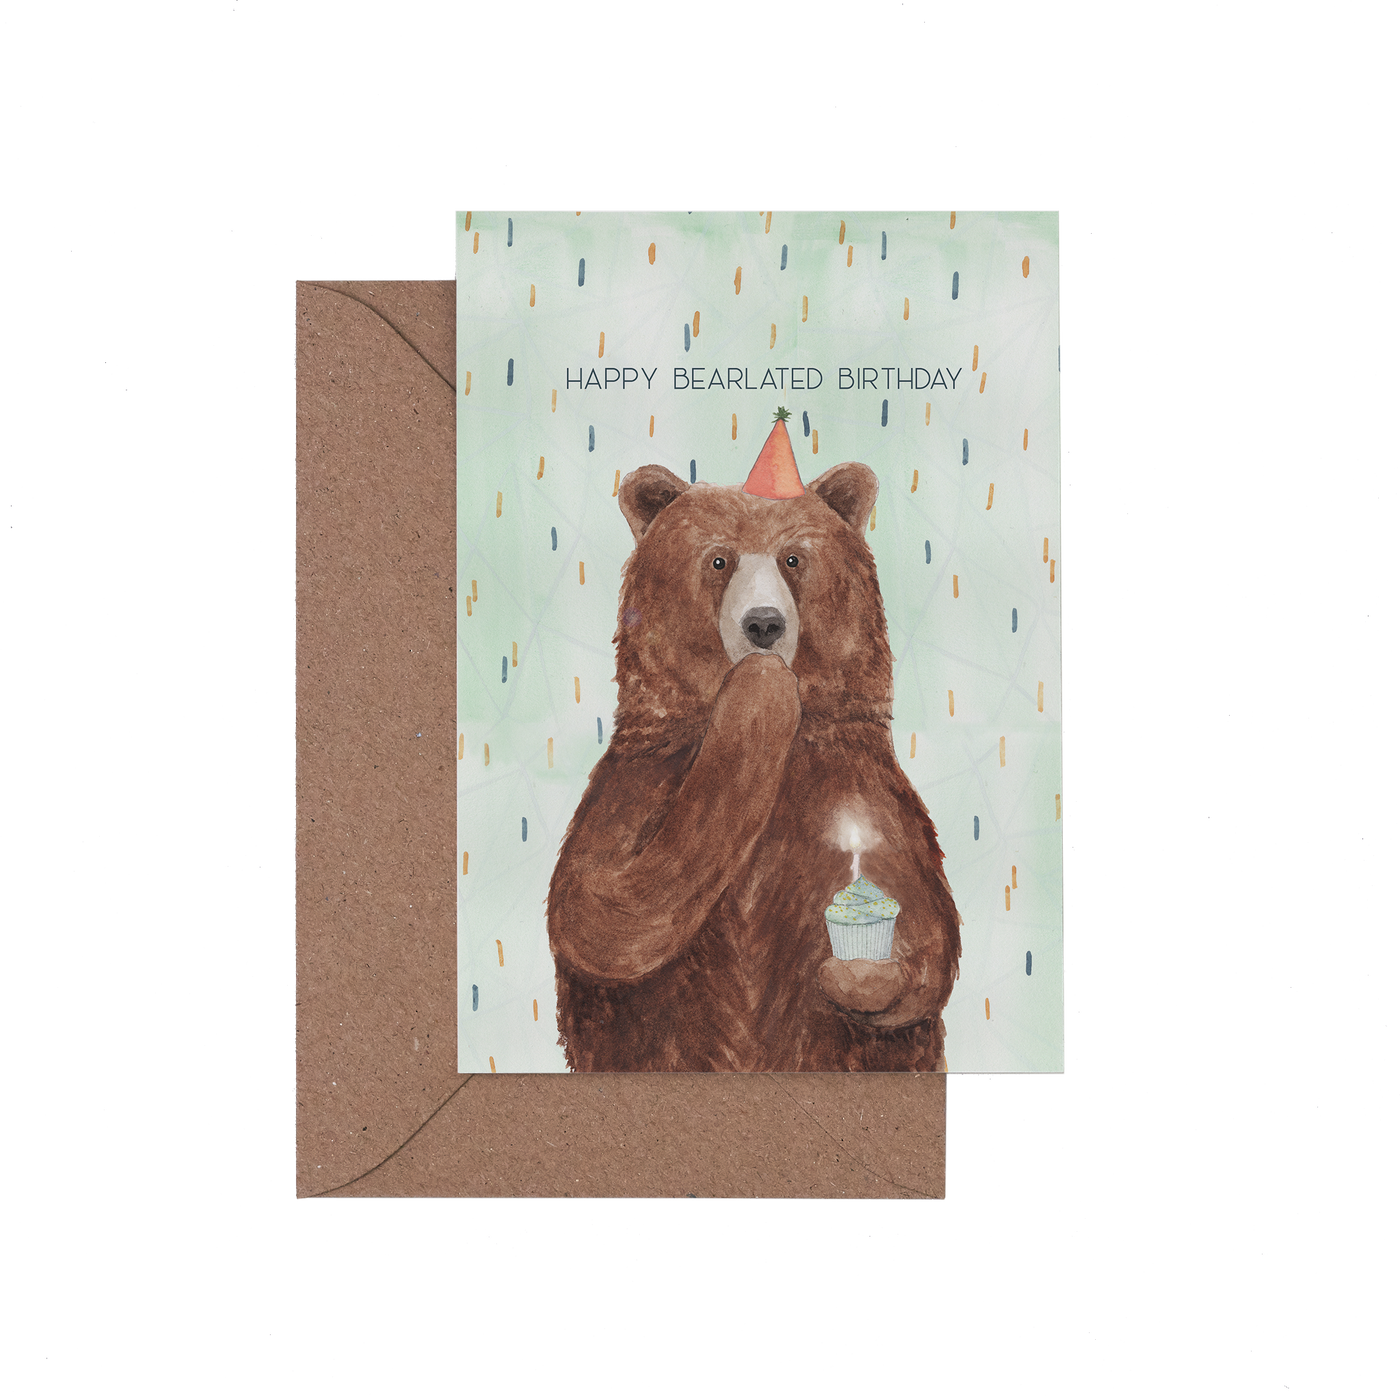 Happy Bearlated Birthday Card cut out